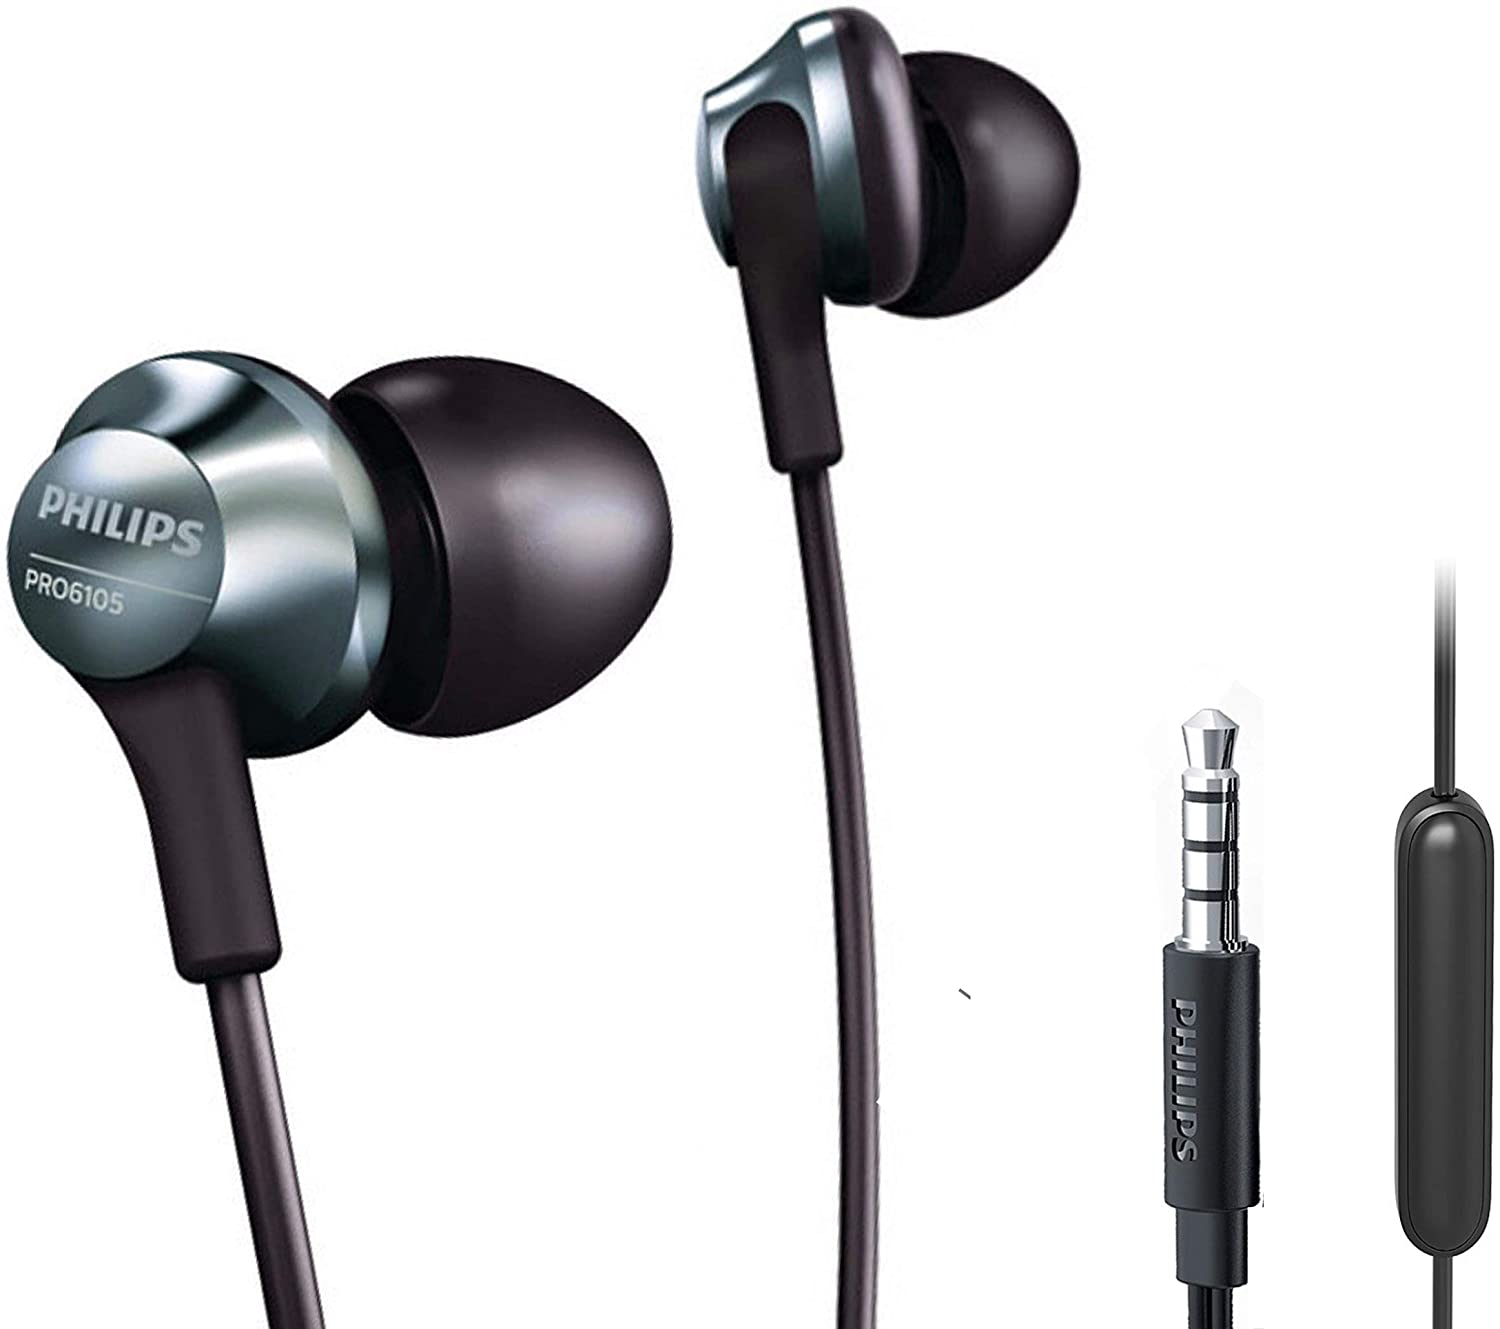 Philips Pro Wired Earbuds, Headphones with Mic, Powerful Bass